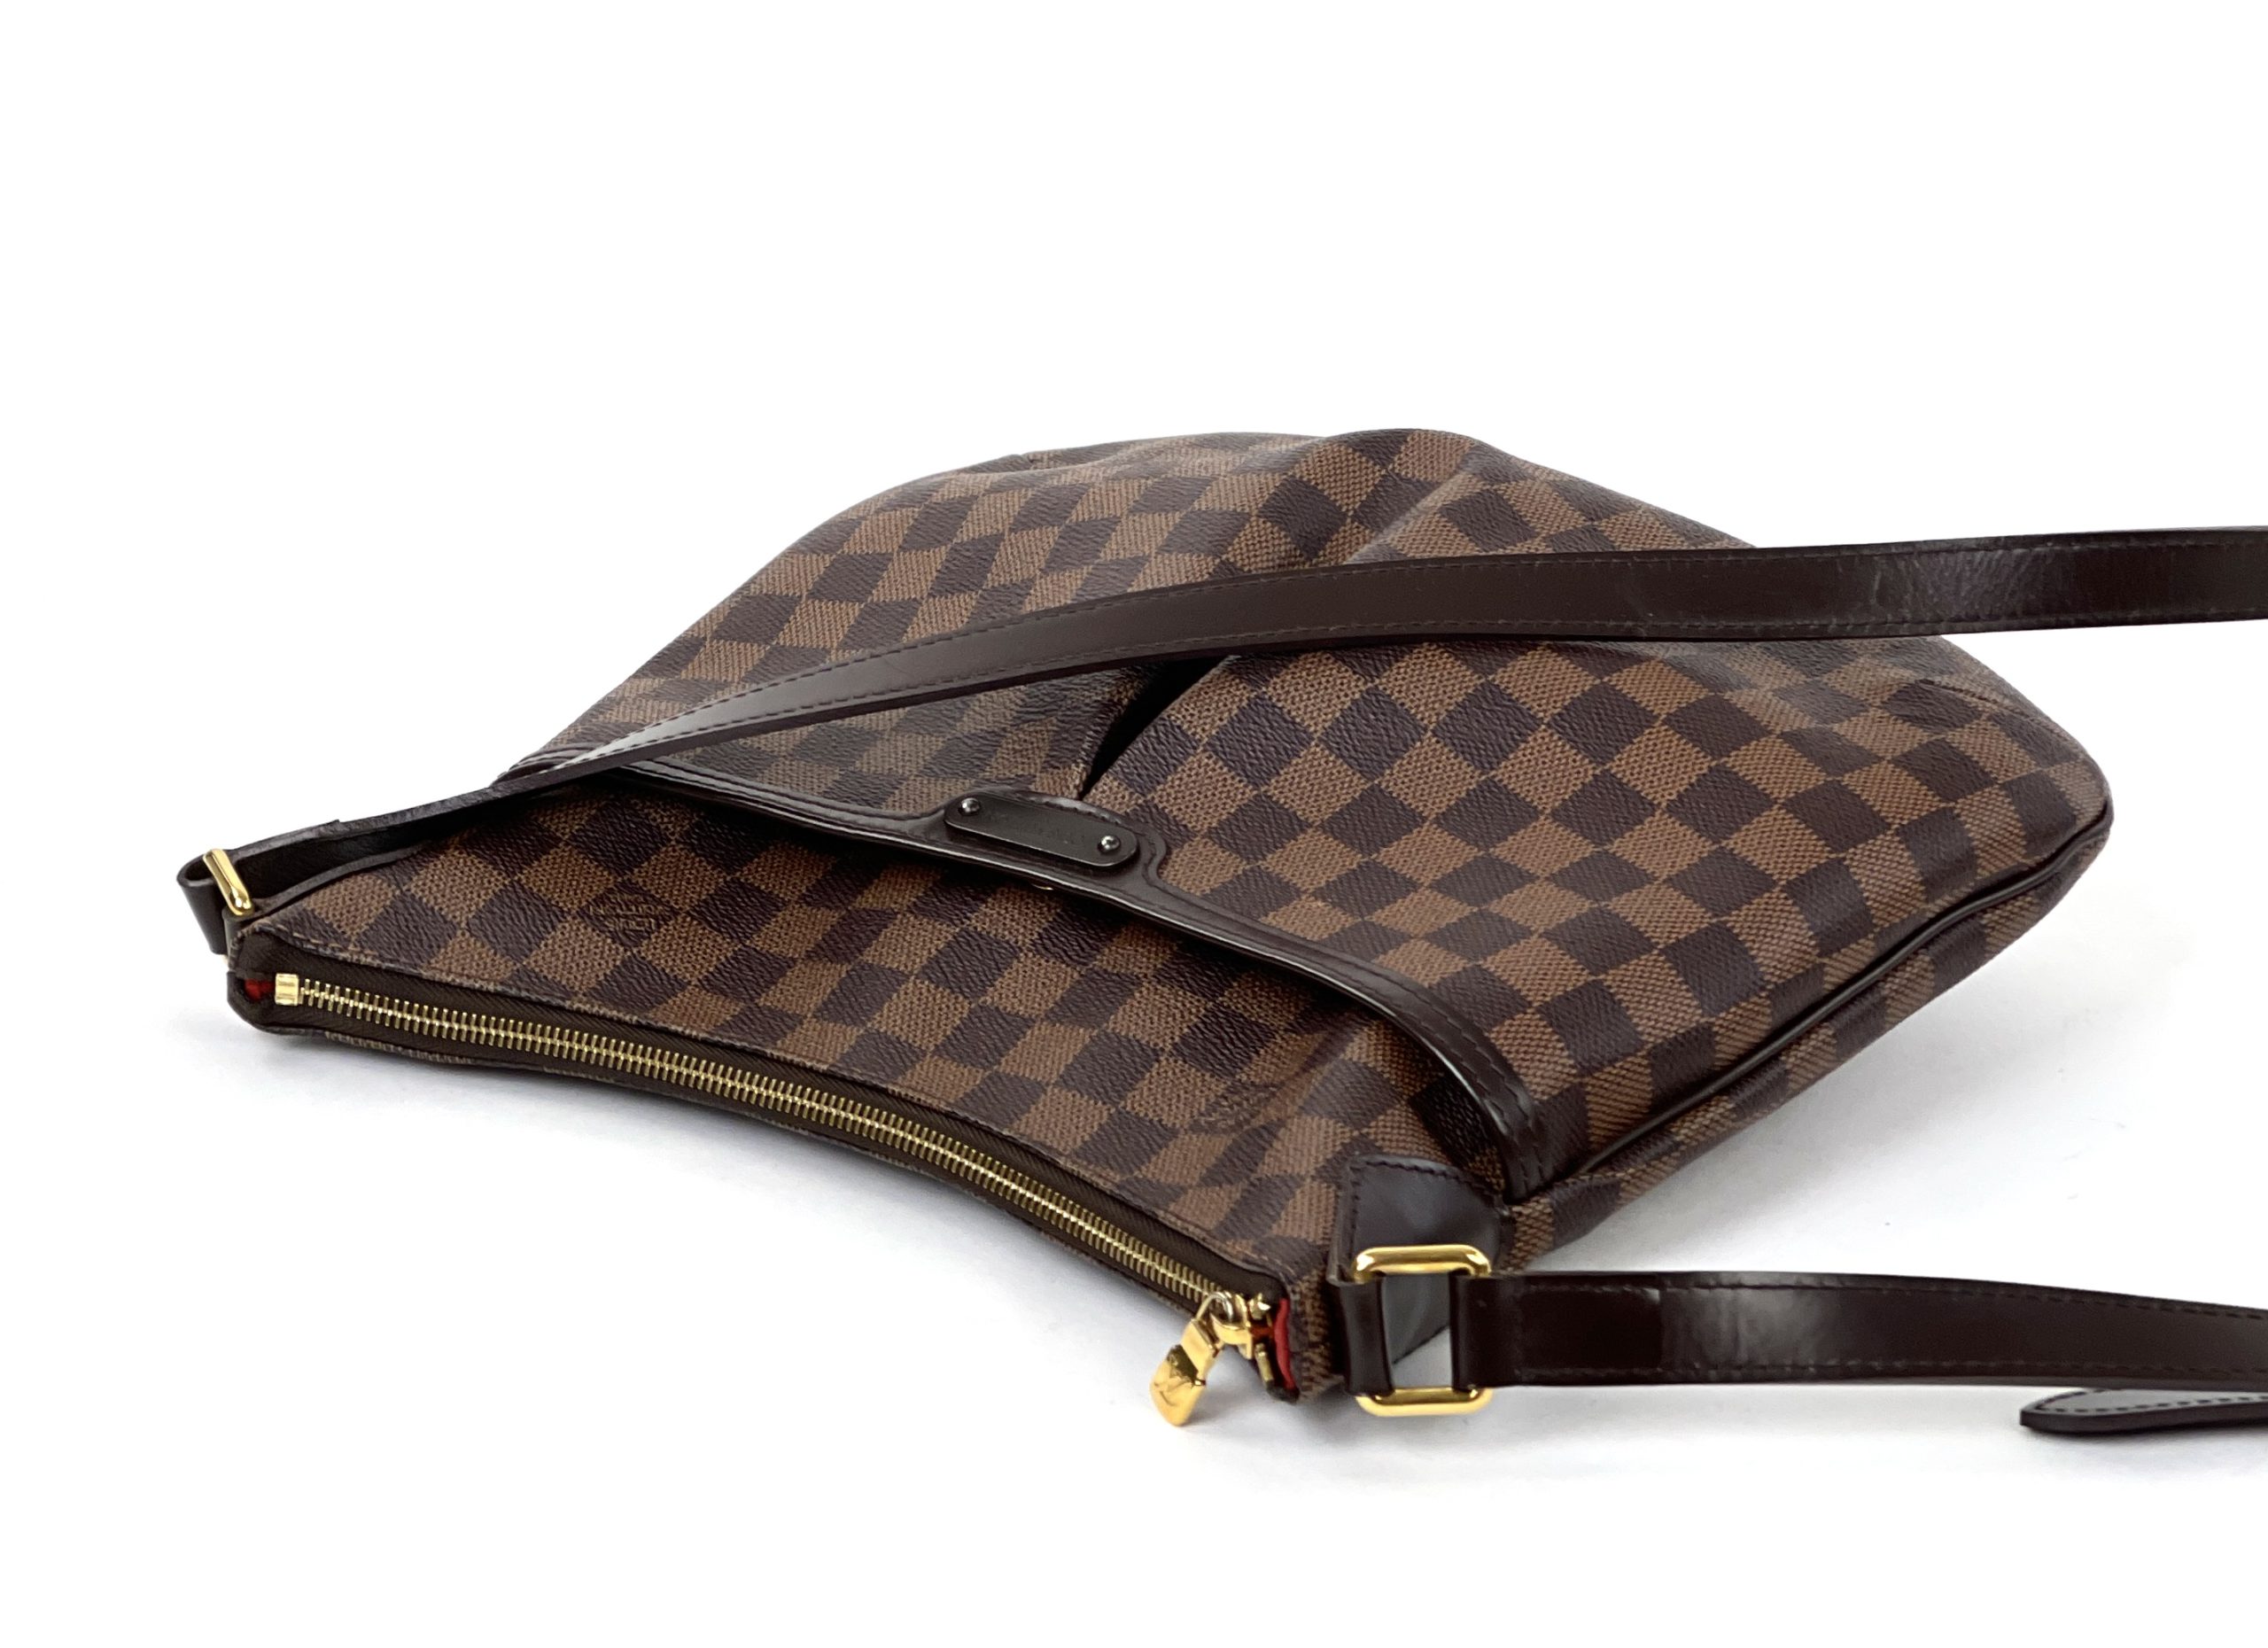 In LVoe with Louis Vuitton: First LVook: Damier Bloomsbury